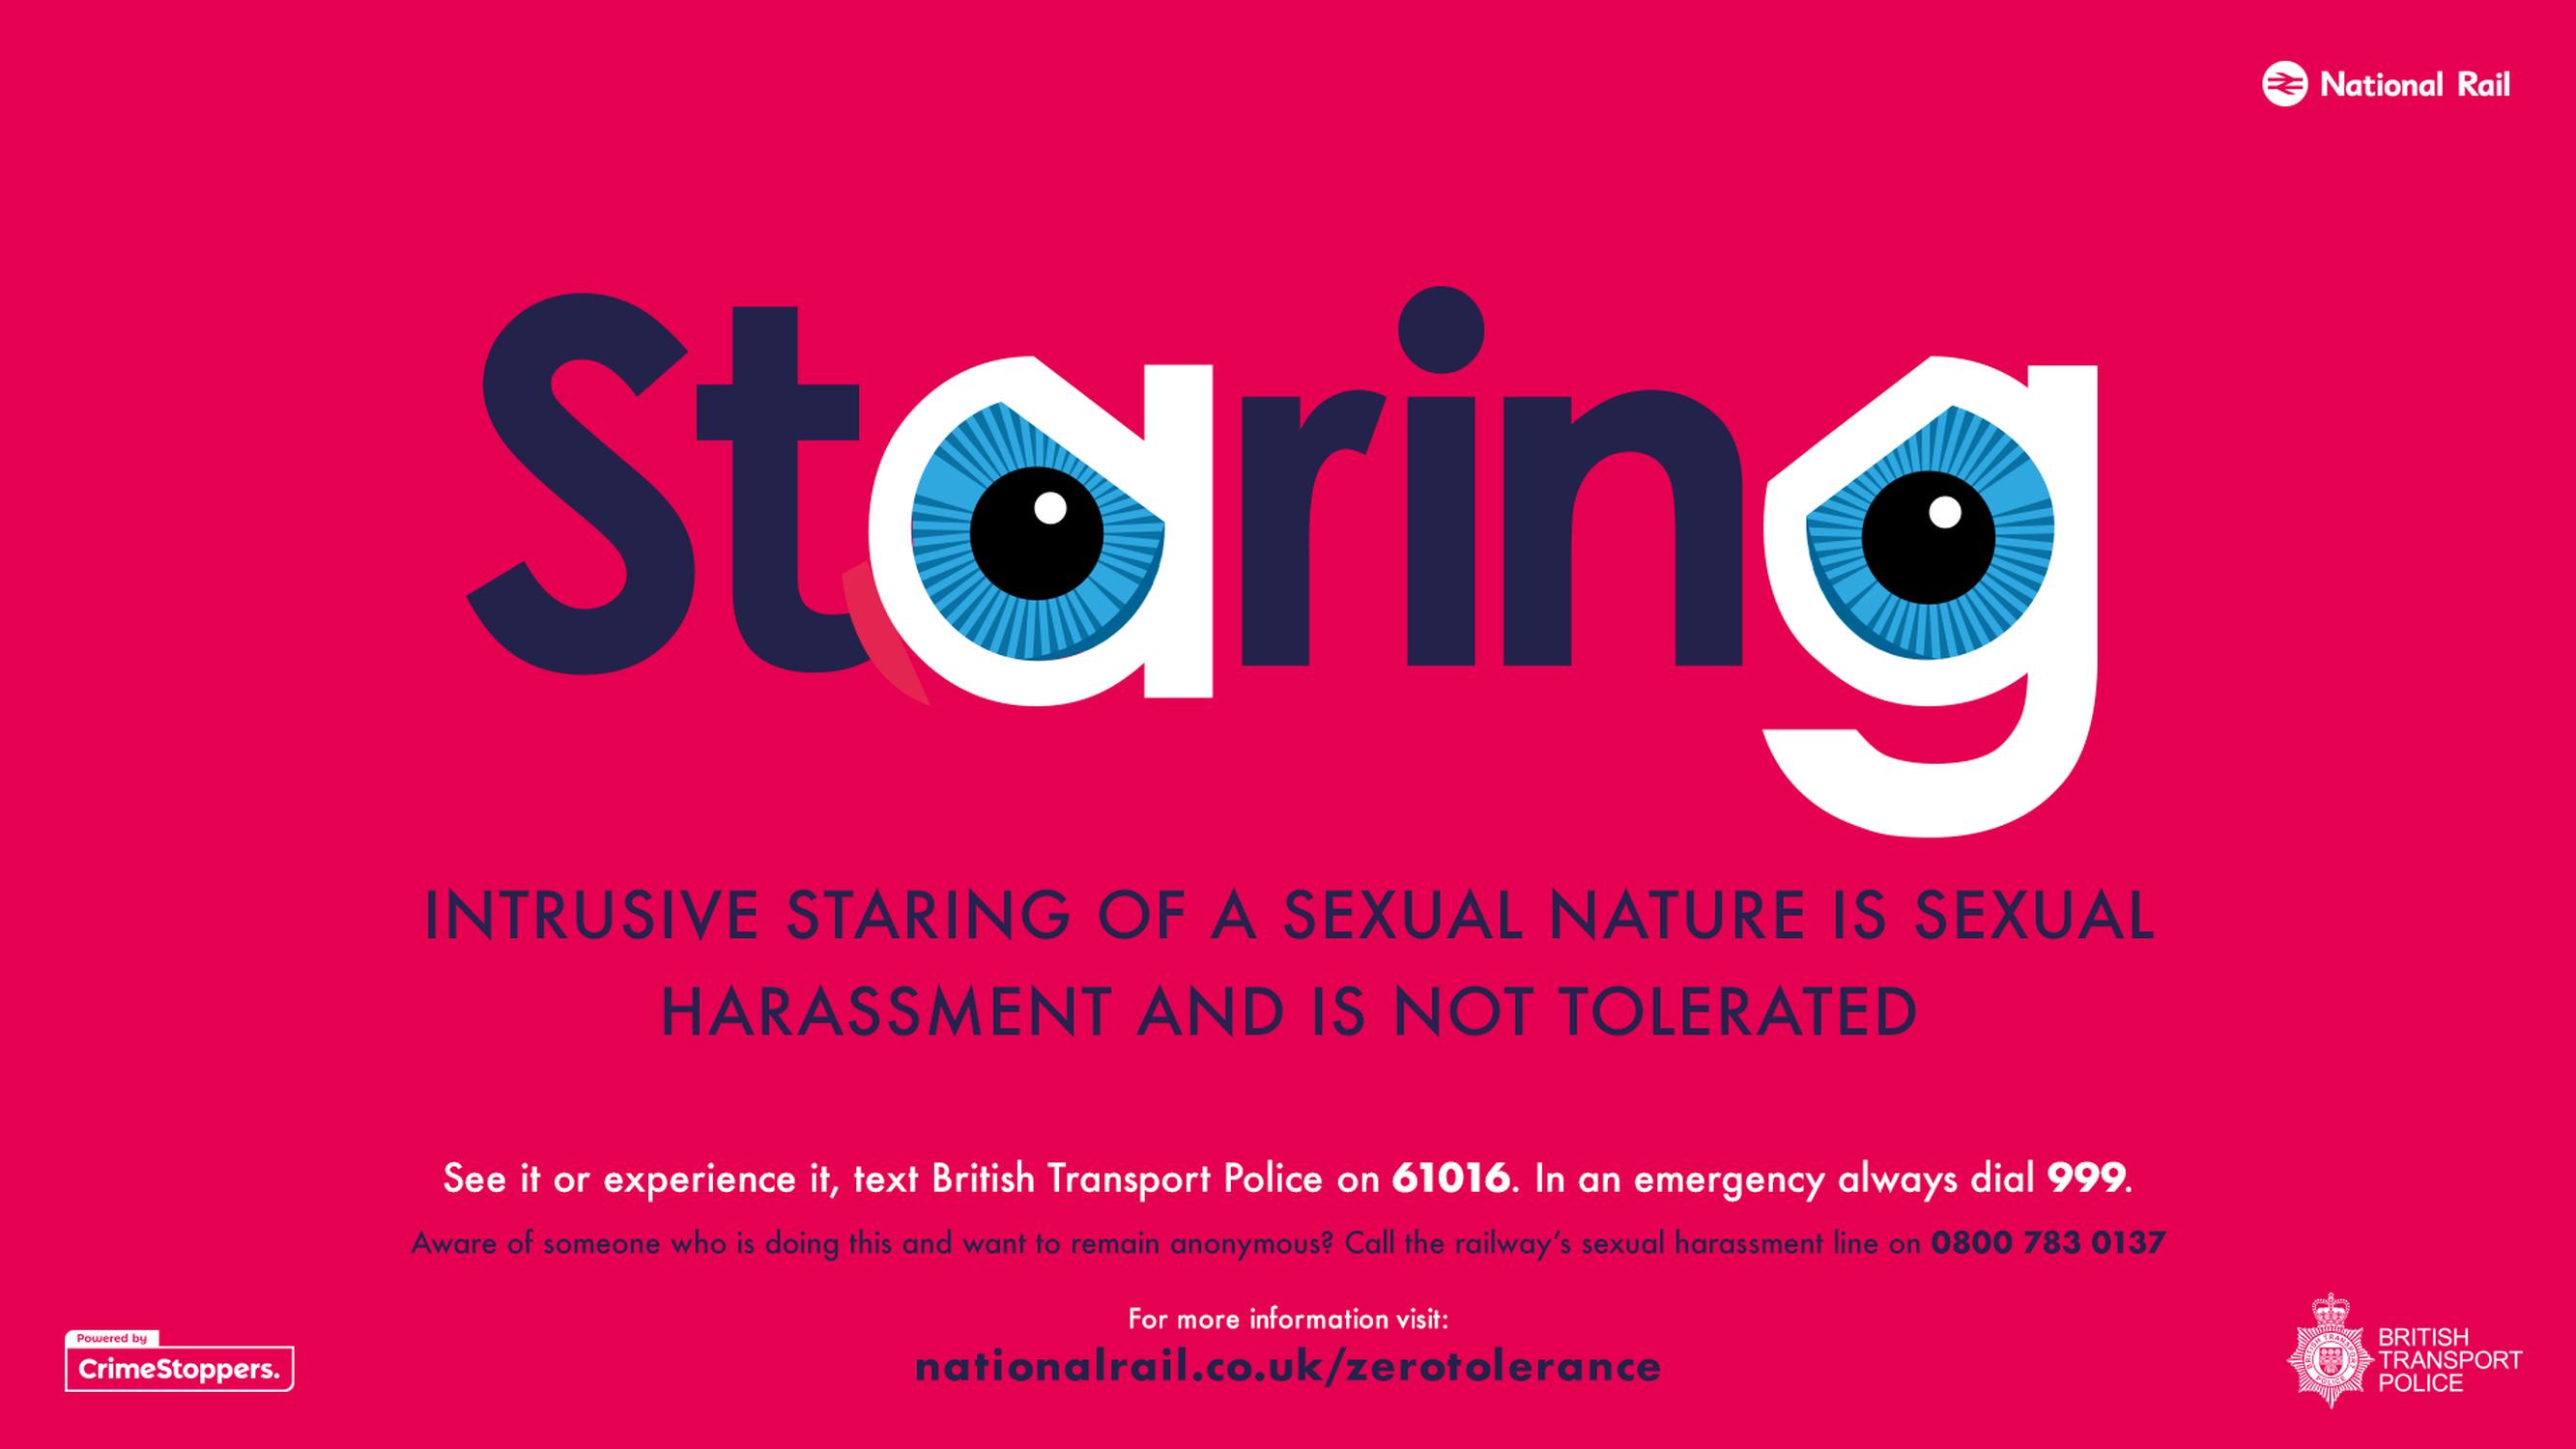 The new `Staring` poster campaign